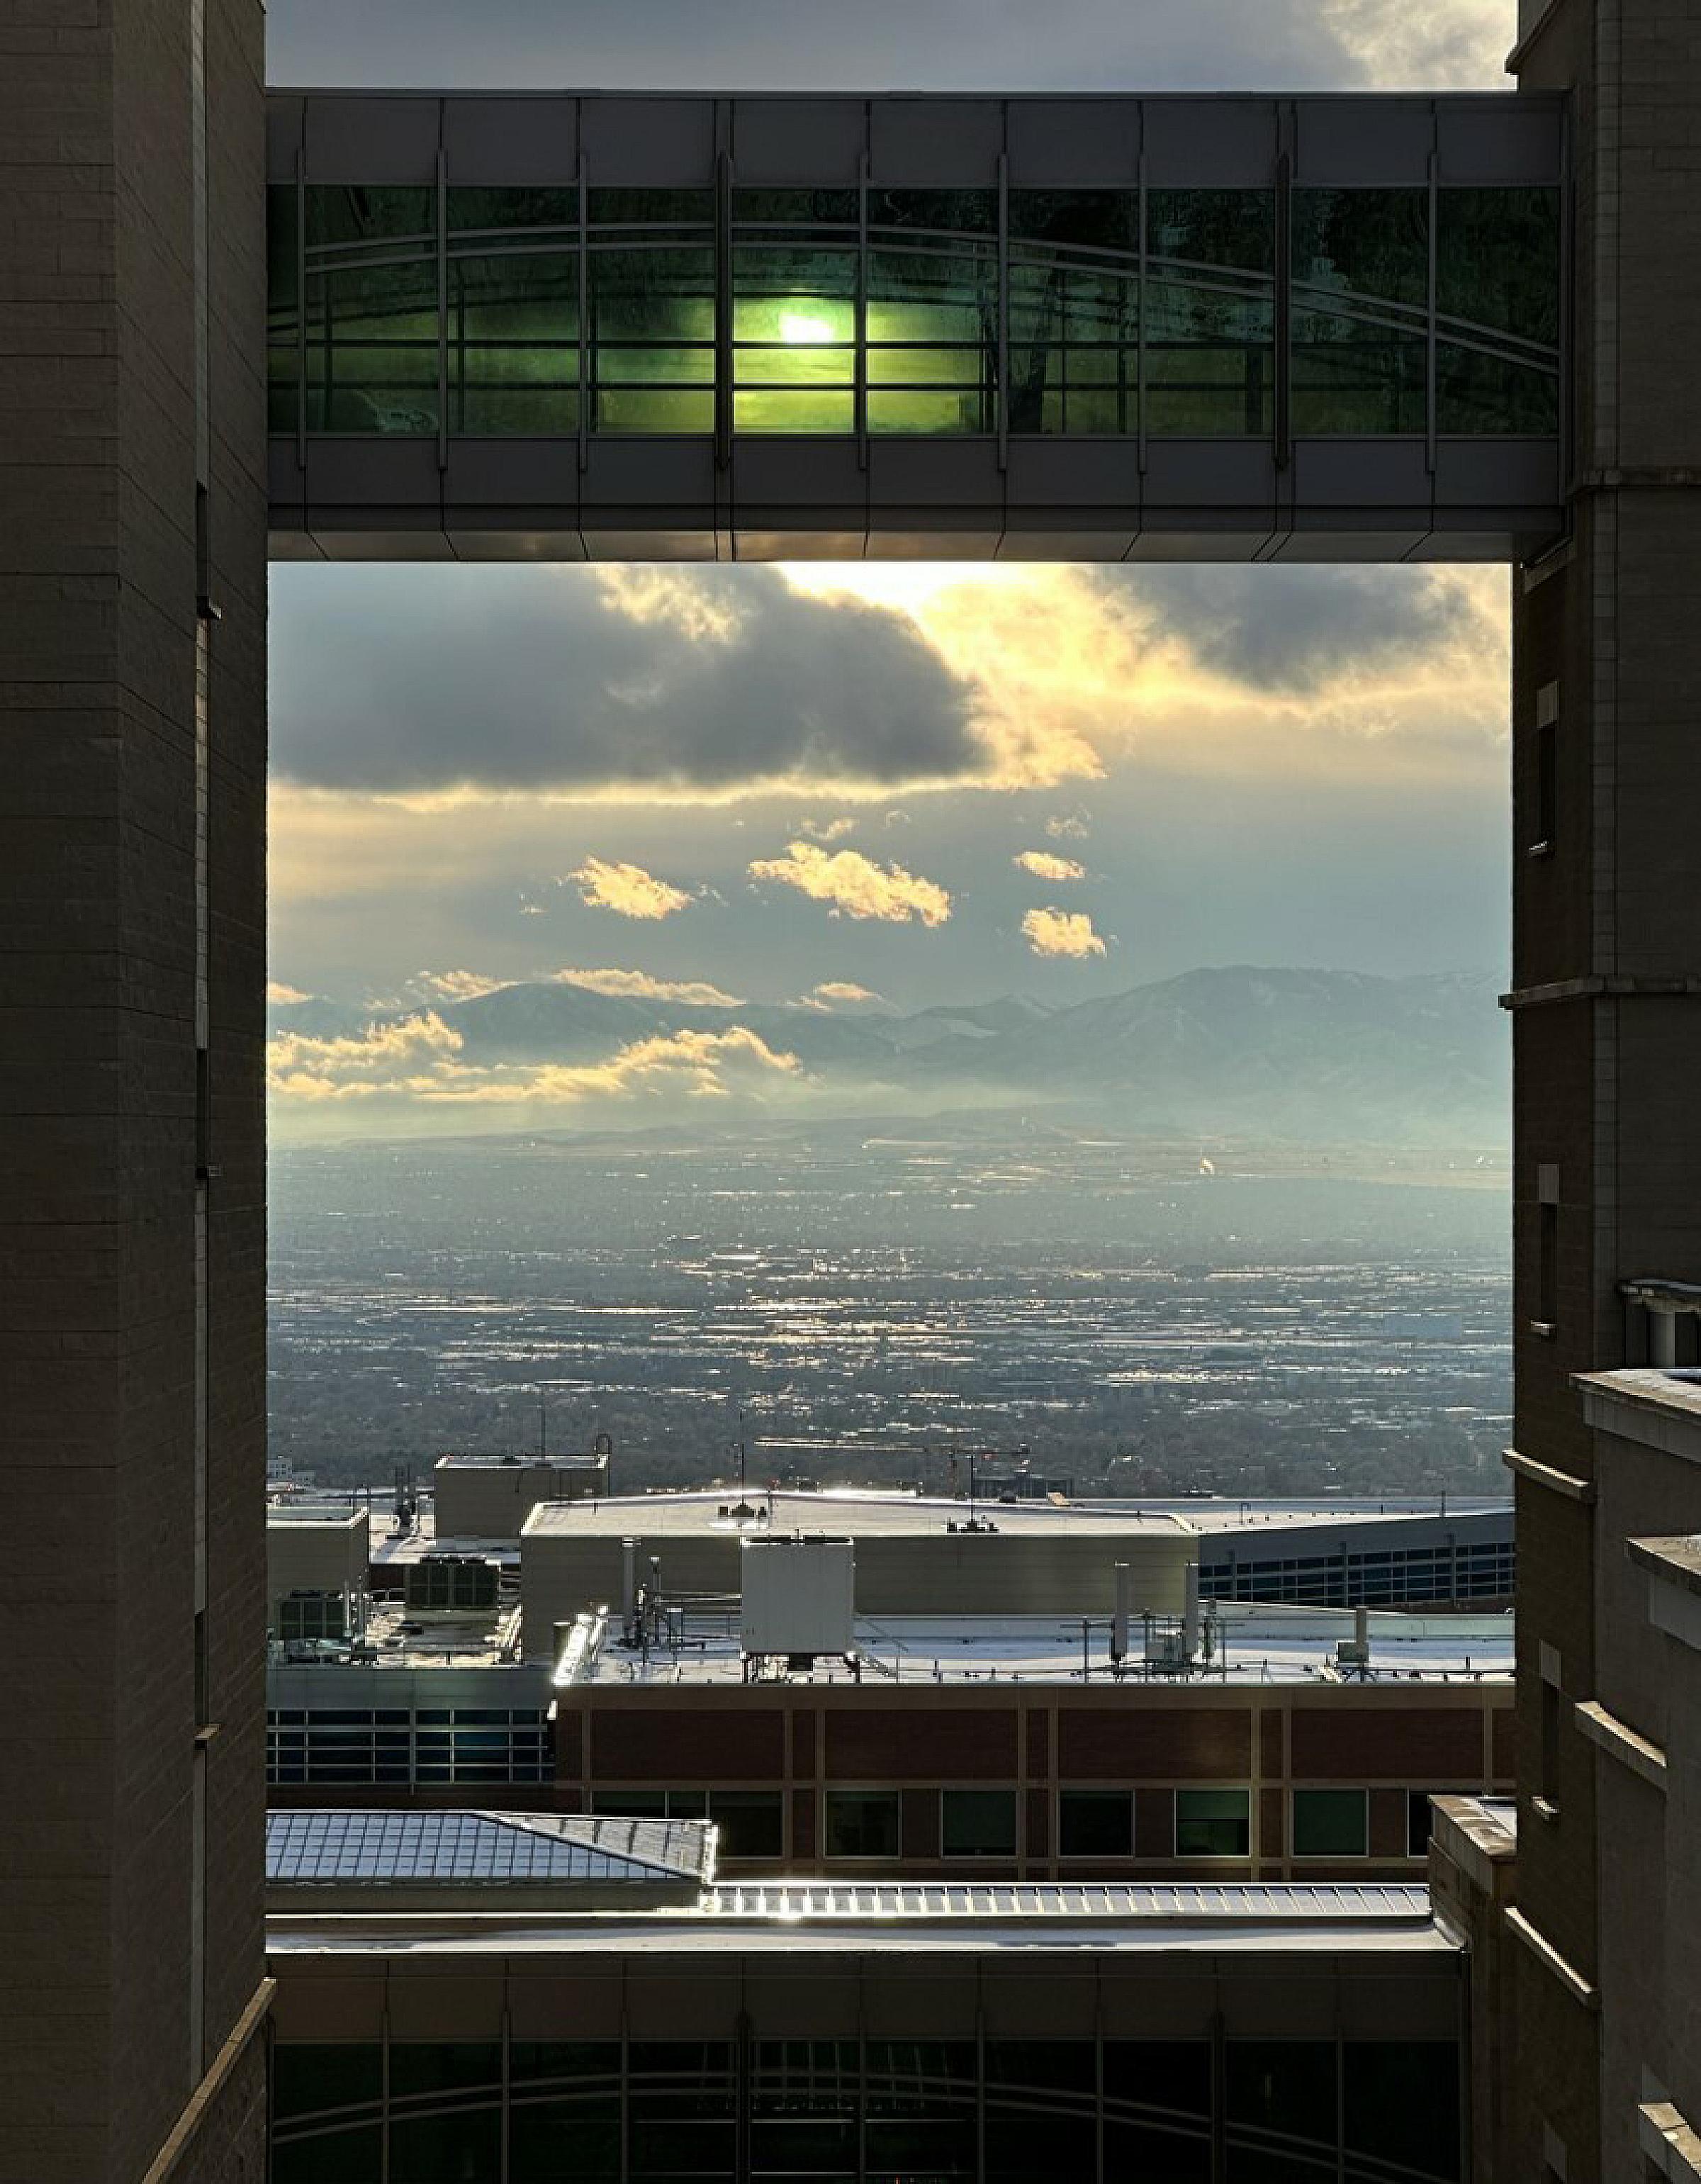 Huntsman Cancer Institute buildings and skybridge forming a window to look out at Salt Lake valley